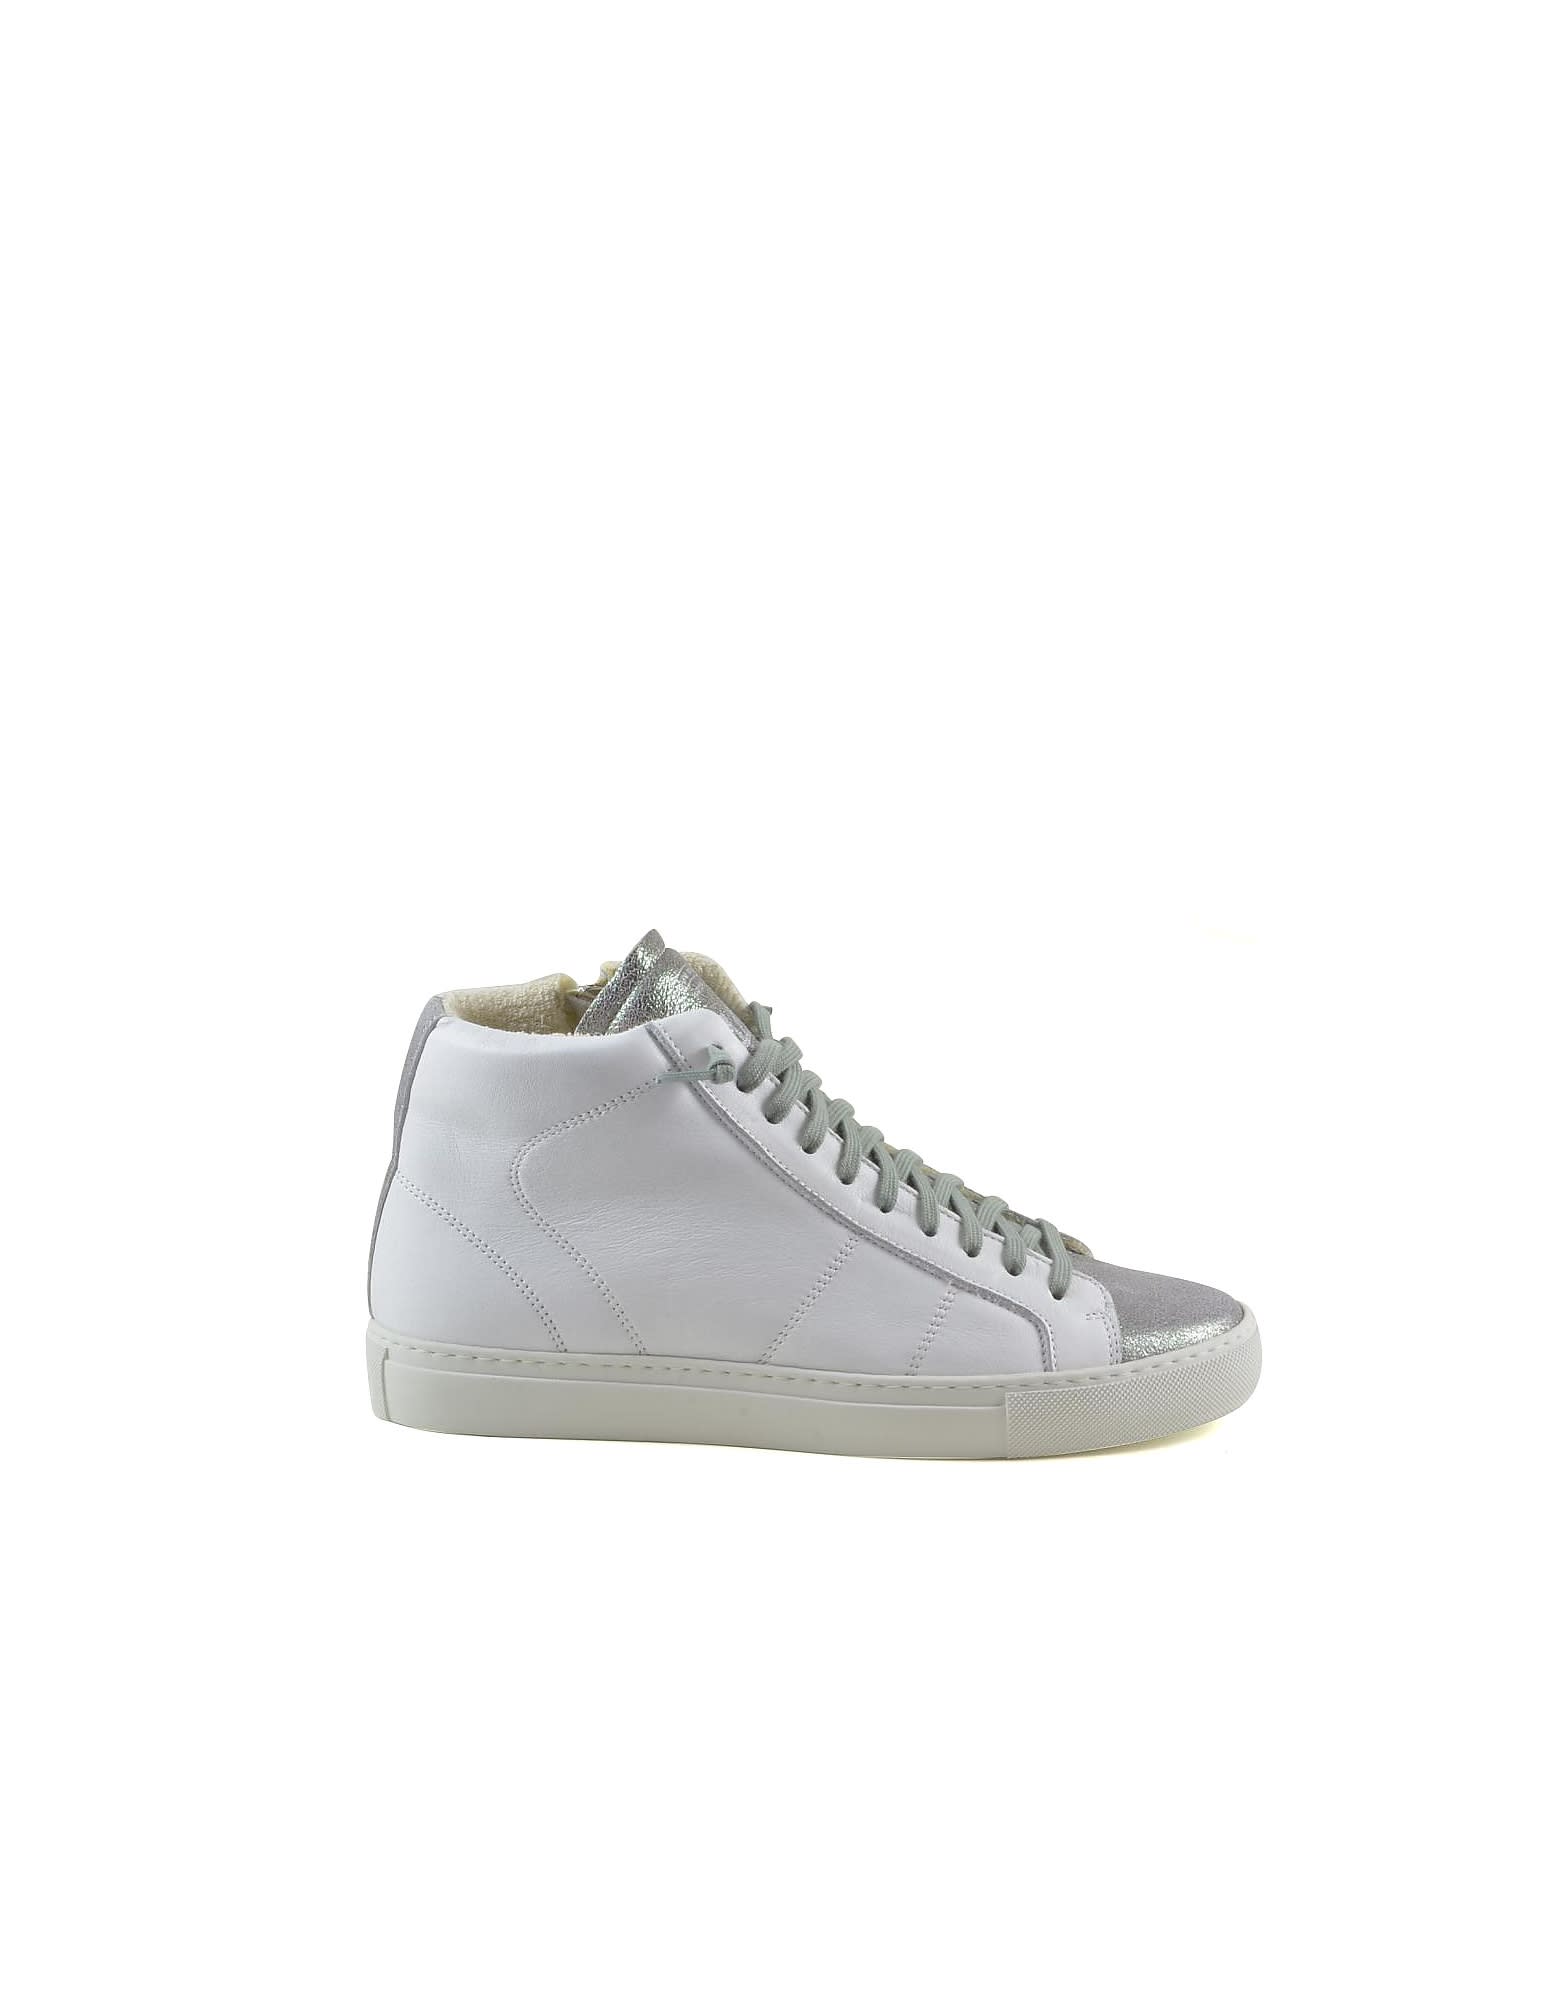 P448 White/silver Leather Mid-top Womens Sneakers